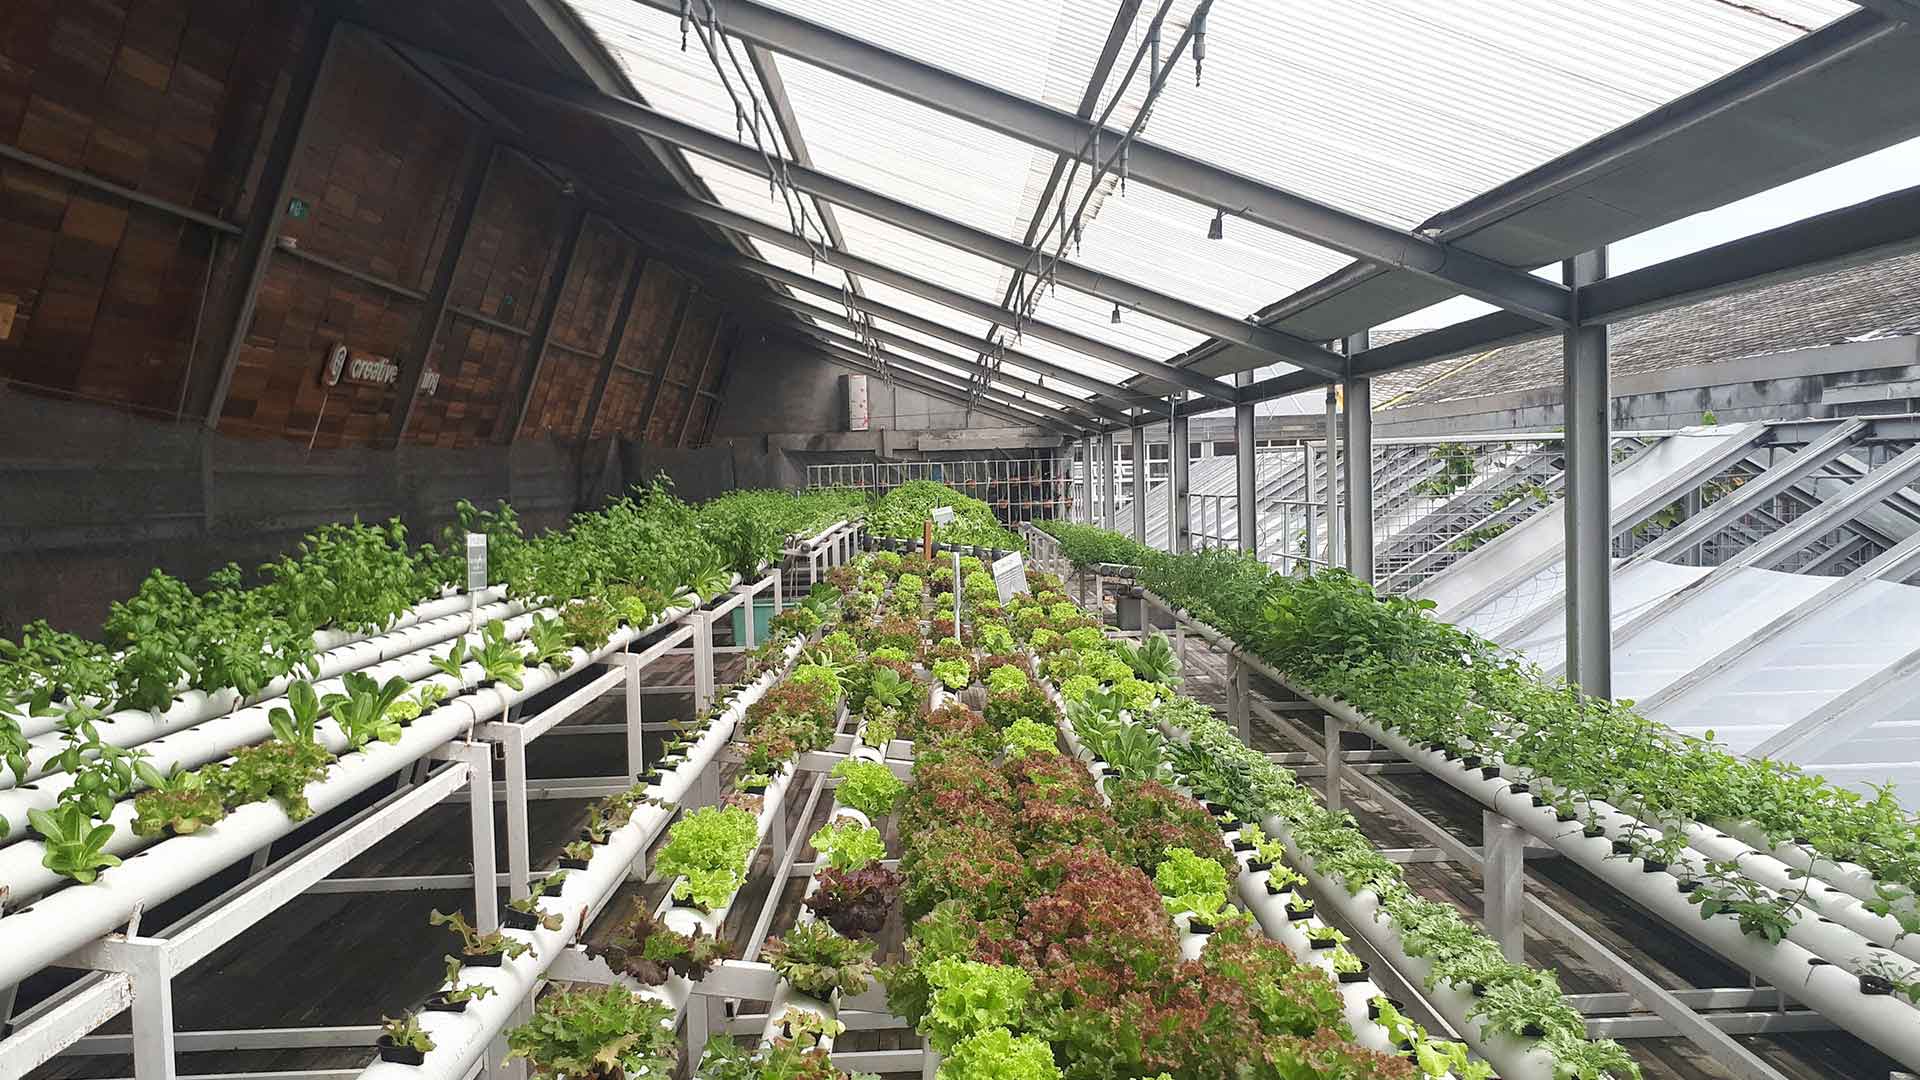 Vertical farming is moving inside buildings in city settings